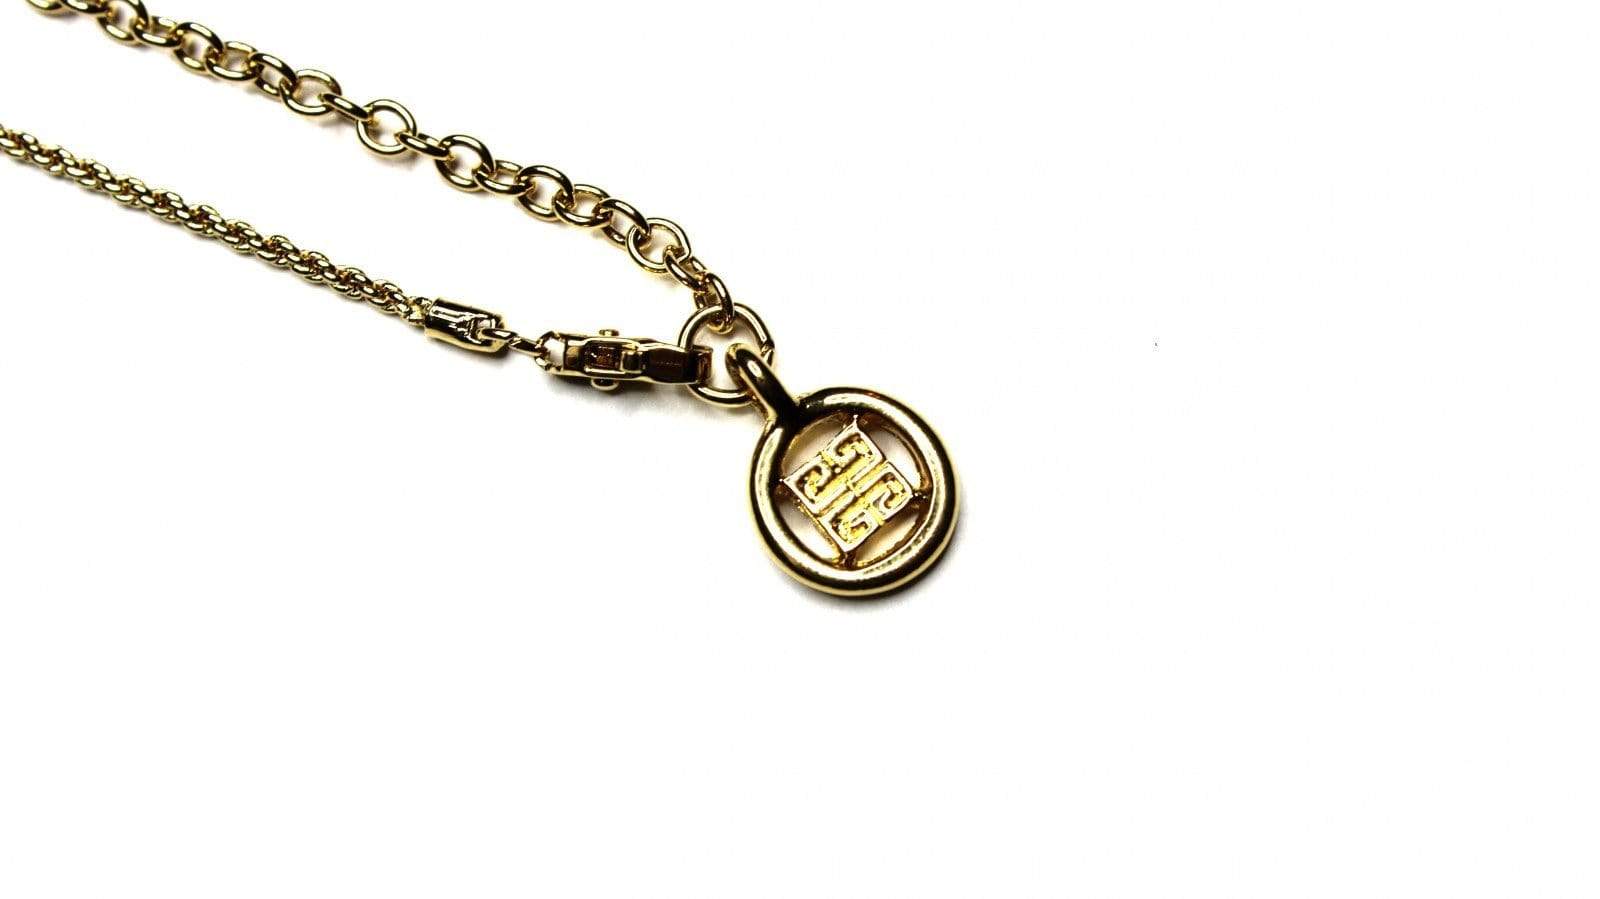 Chanel Vintage - CC Rhinestone Necklace - Gold - Necklace Chanel - Luxury  High Quality - Avvenice